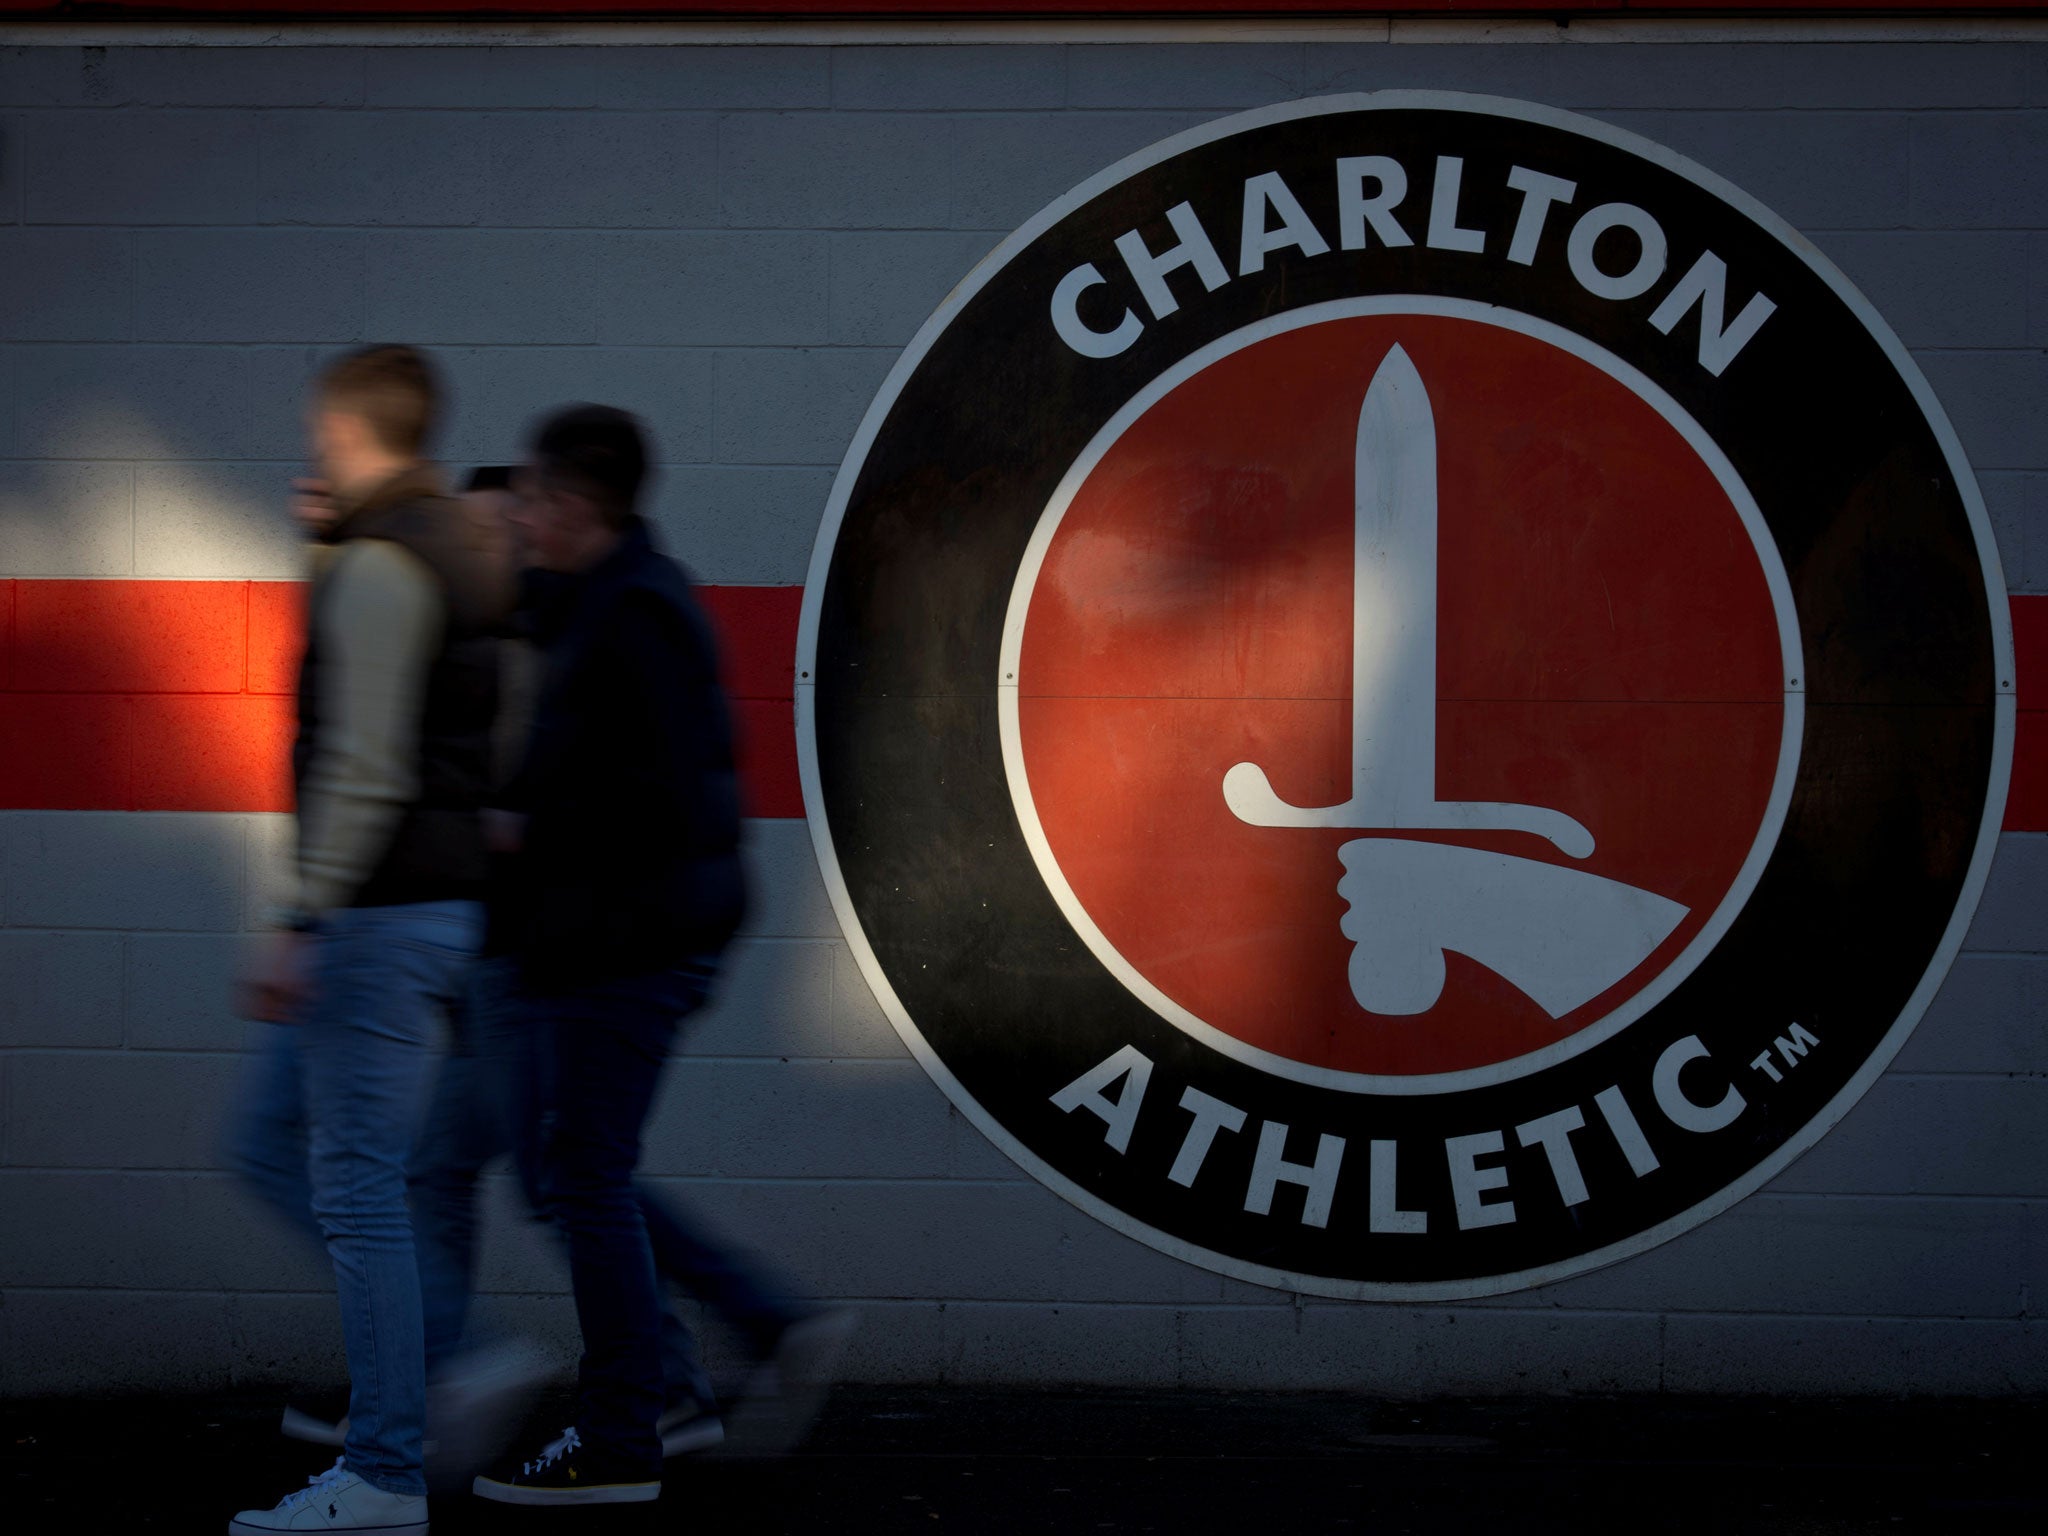 Fans arrive at Charlton Athletic's home ground The Valley